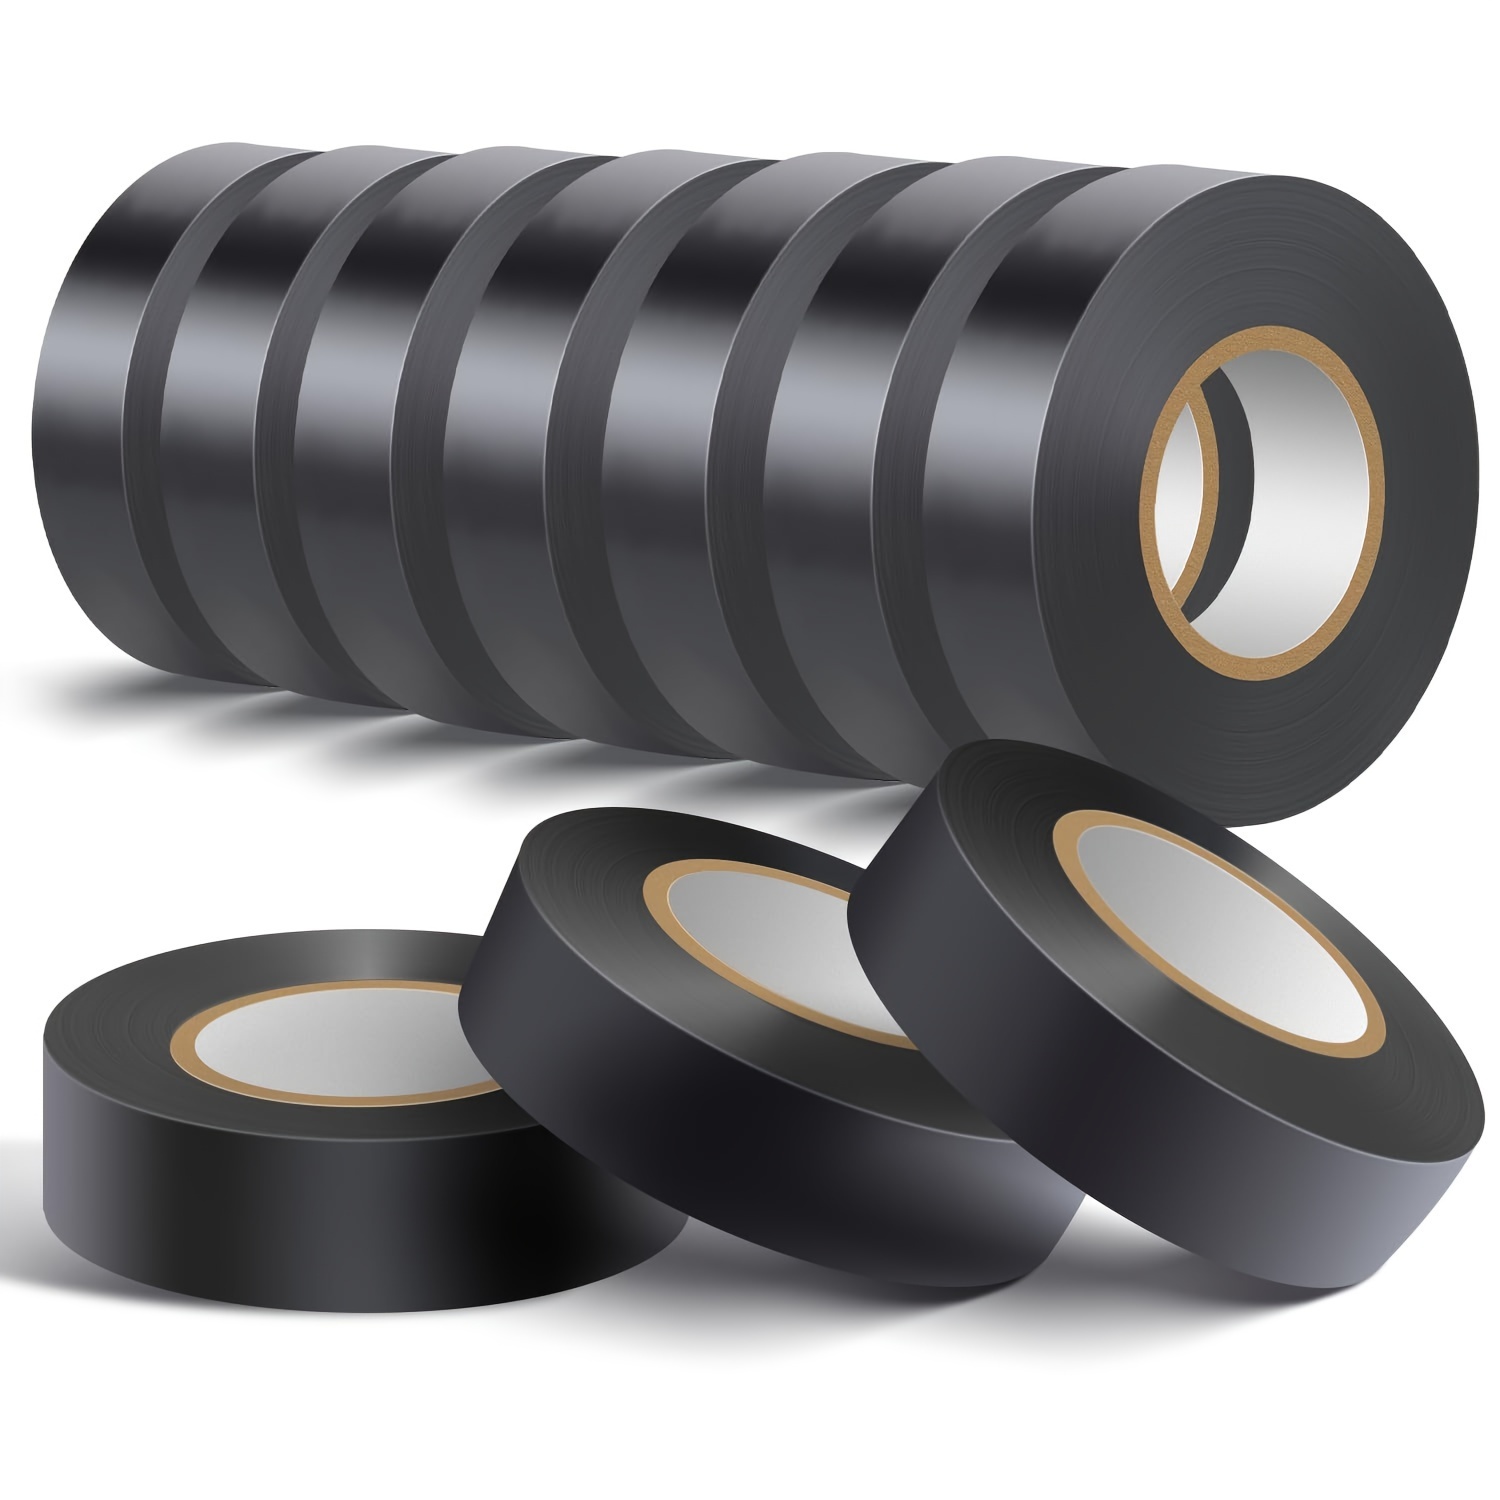 

10pcs Electrical Tape, Flame Retardant Indoor Outdoor High Temperature Resistance Electric Tape, Premium Black Tape For Workshop Use